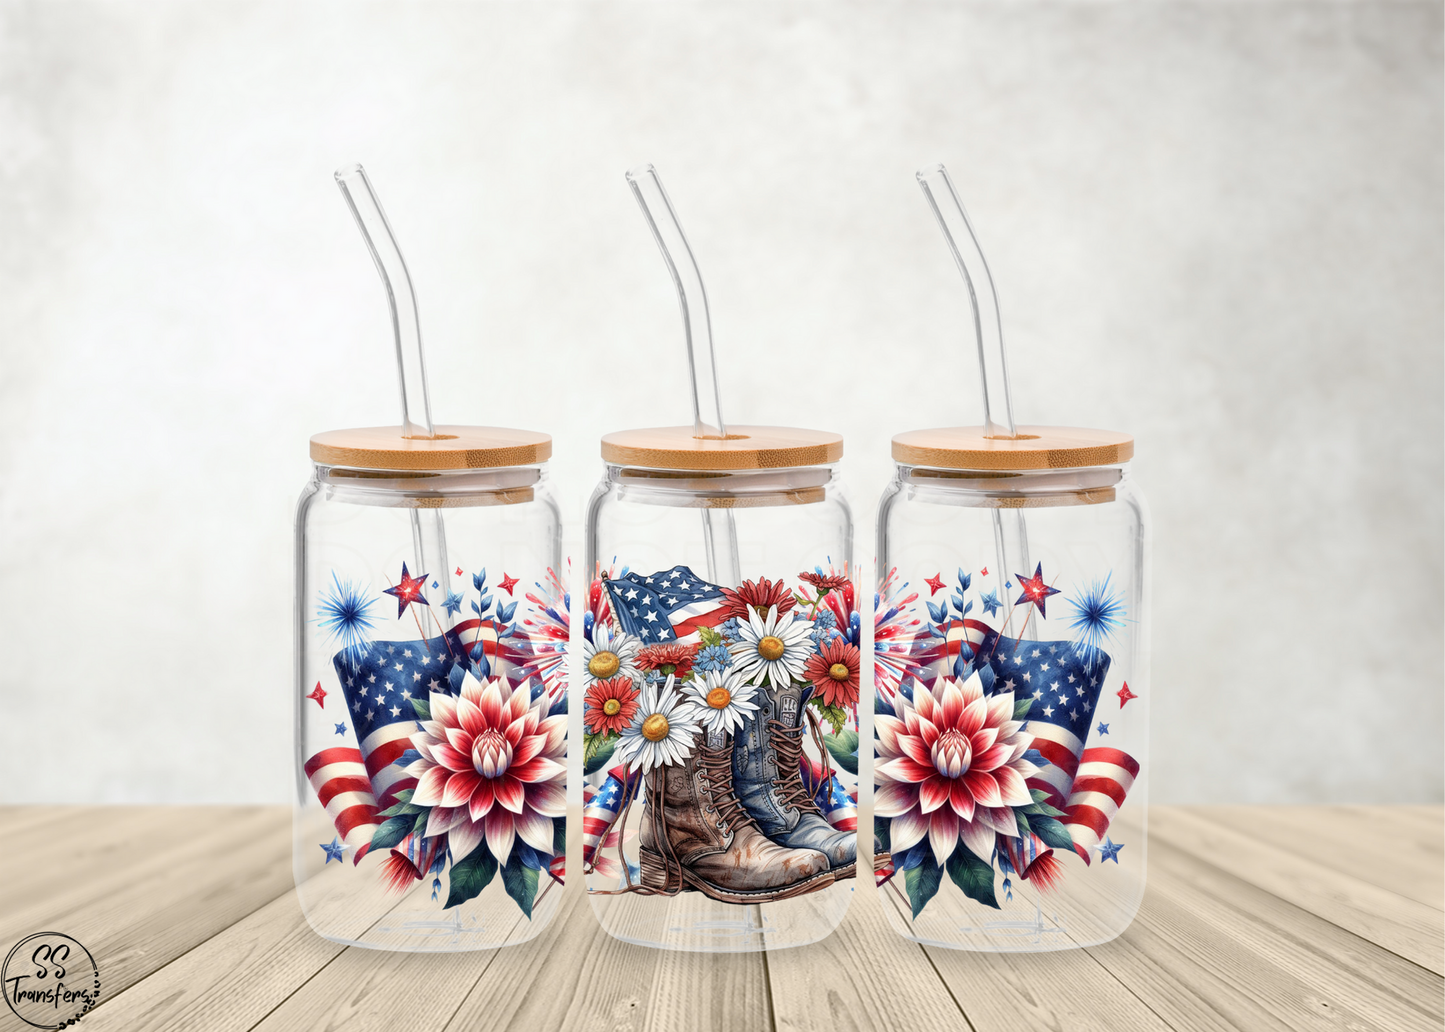 Patriotic Boots, Flags and Flowers Libbey UV Wrap